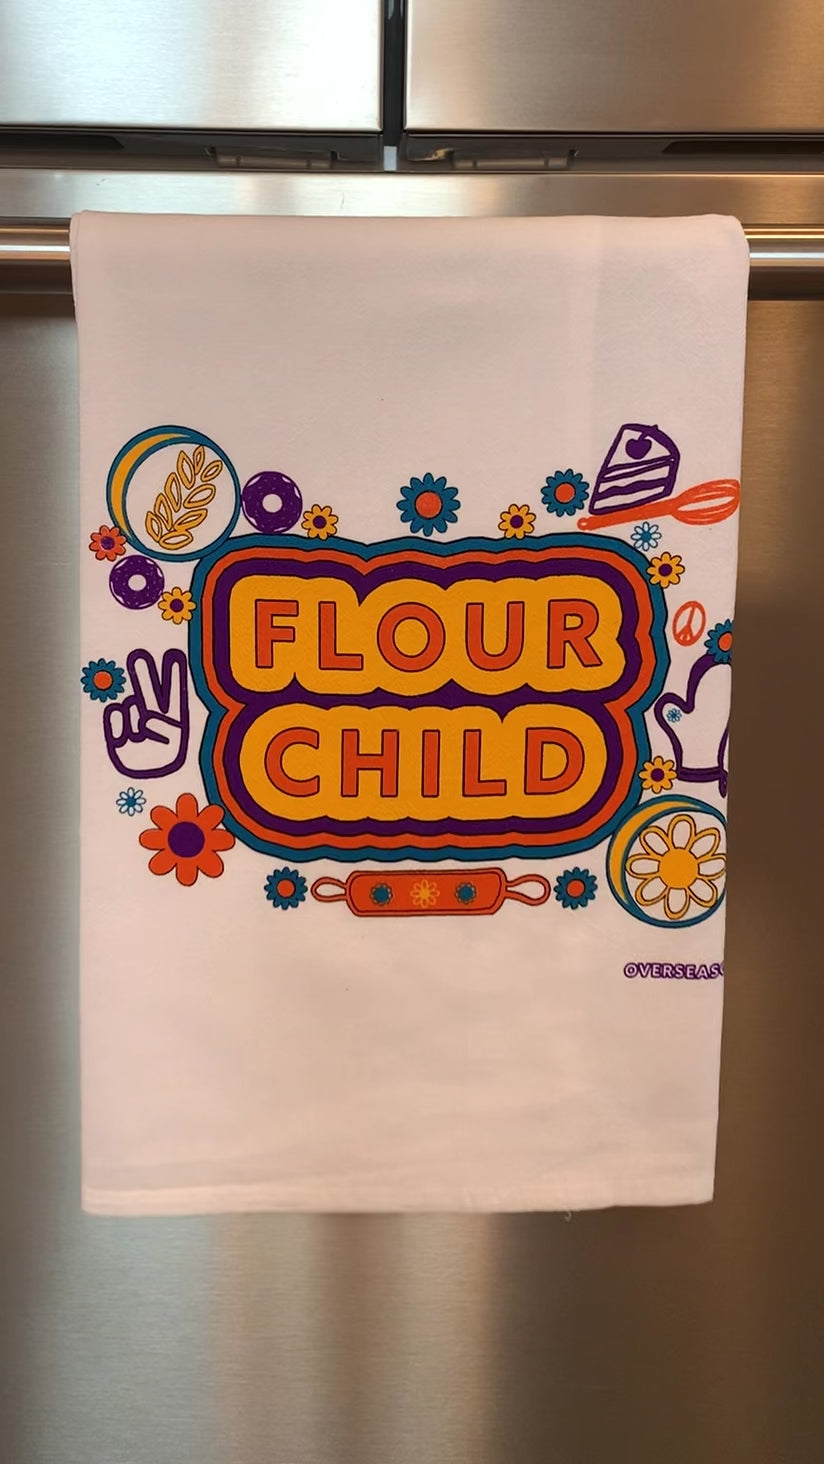 A white tea towel with the words "Flour Child" and colorful designs hangs in a kitchen